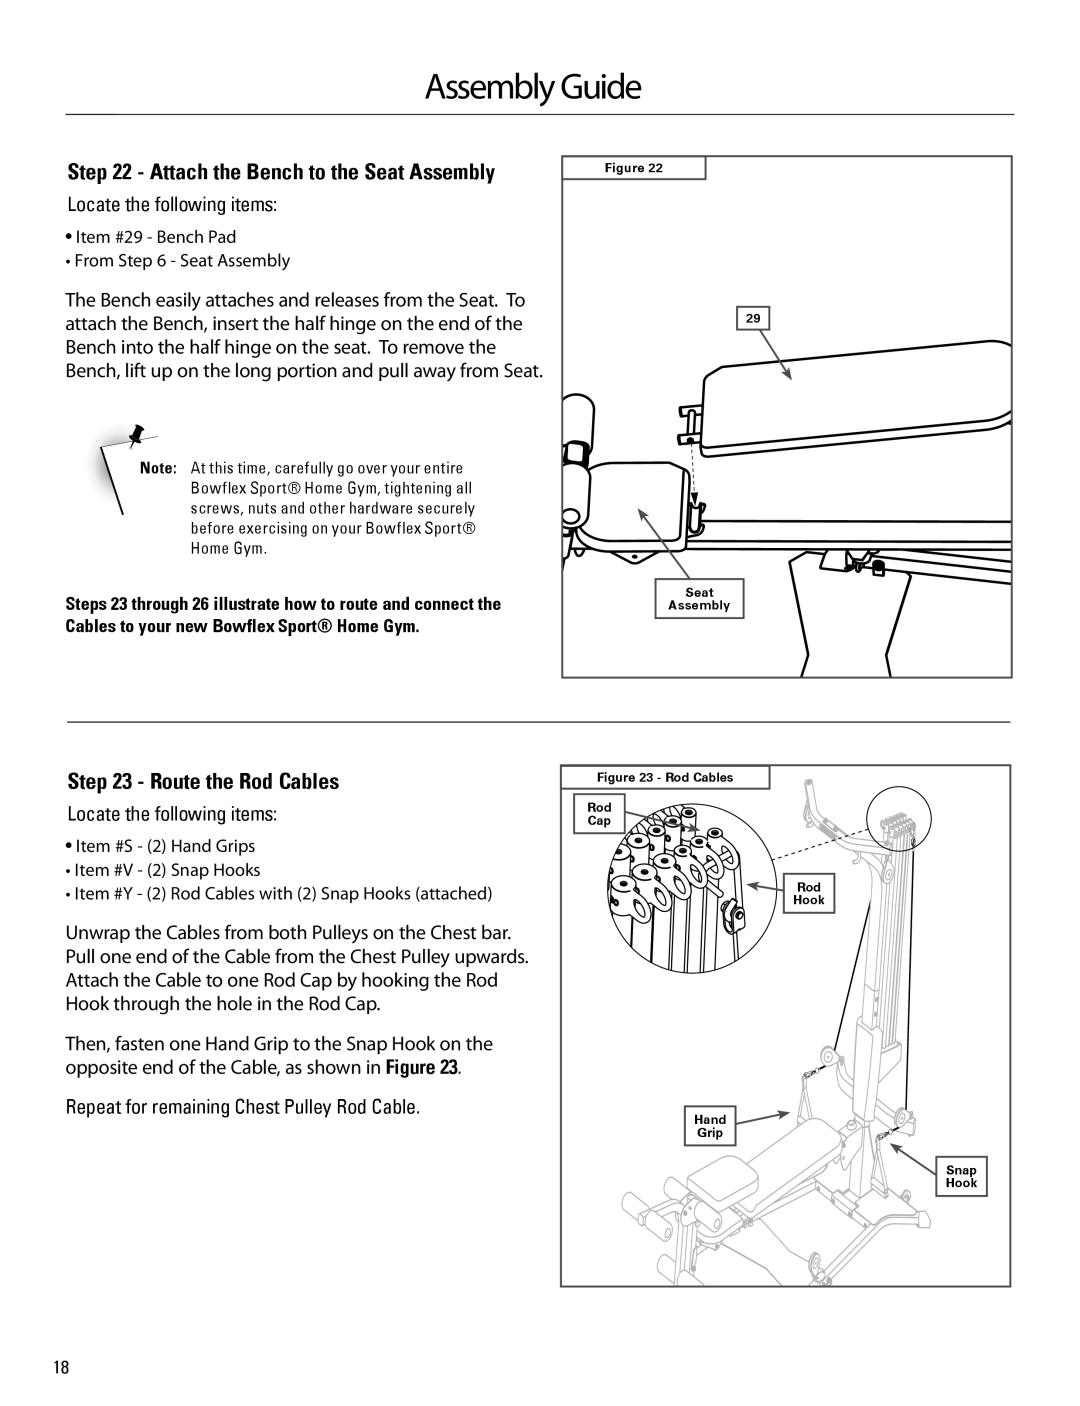 Bowflex 001-6961 Attach the Bench to the Seat Assembly, Route the Rod Cables, Assembly Guide, Locate the following items 